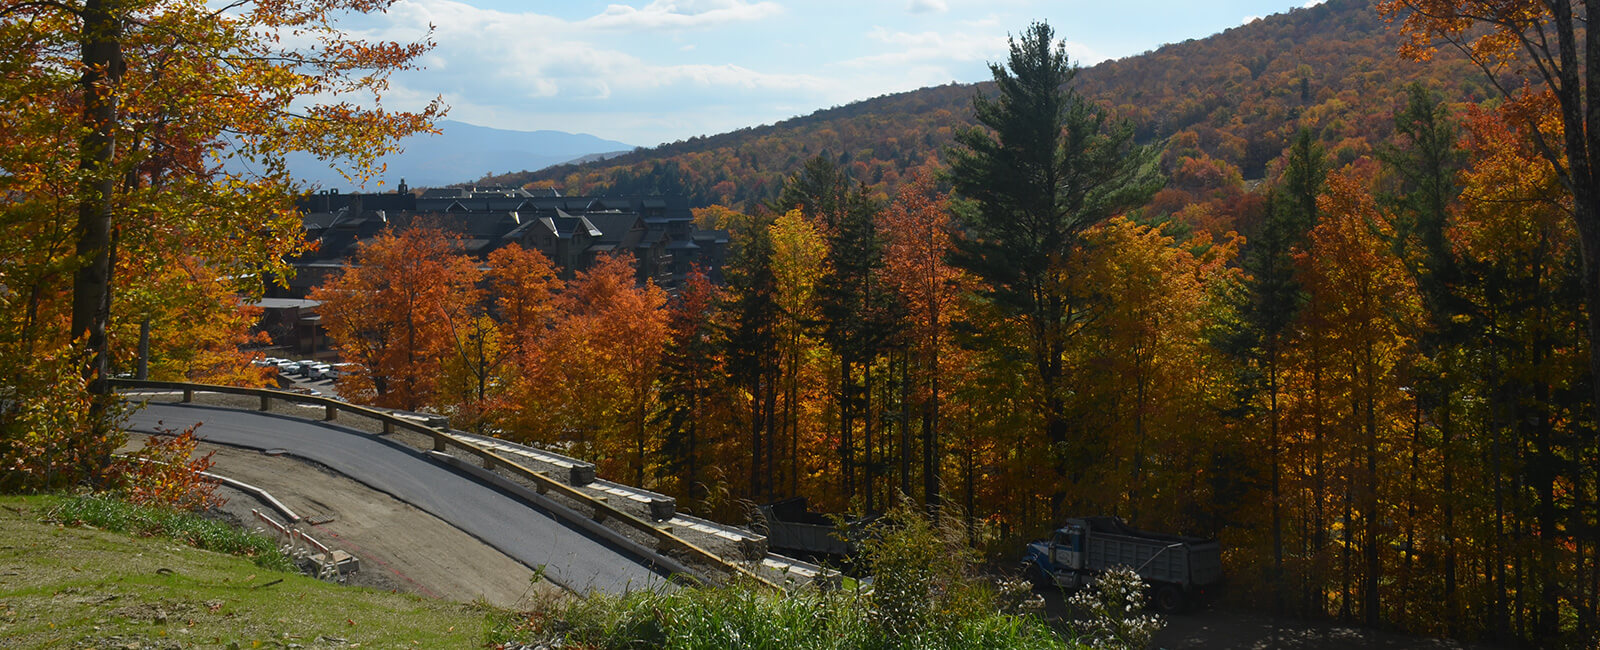 Experience Spruce Peak your way.  Build your dream home in the Northeast’s most luxurious mountain community.